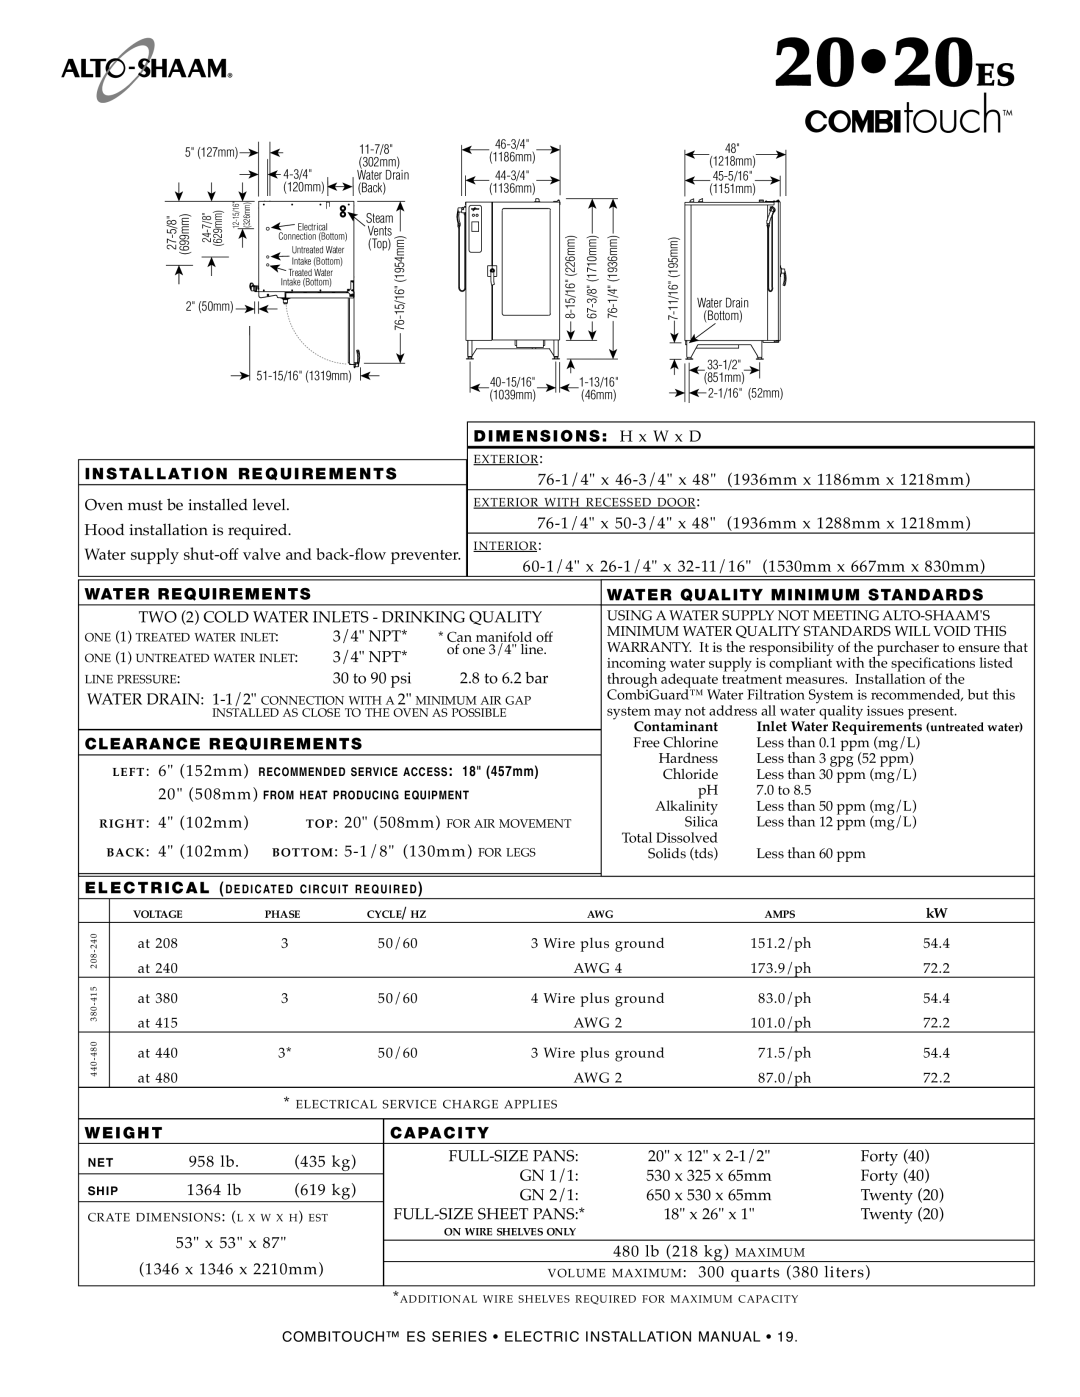 Alto-Shaam MN-29245 manual 2020ES, INS TA LL AT ION REQUIREM ENTS Oven must be installed level, DIM ENS IONS H x W x D 